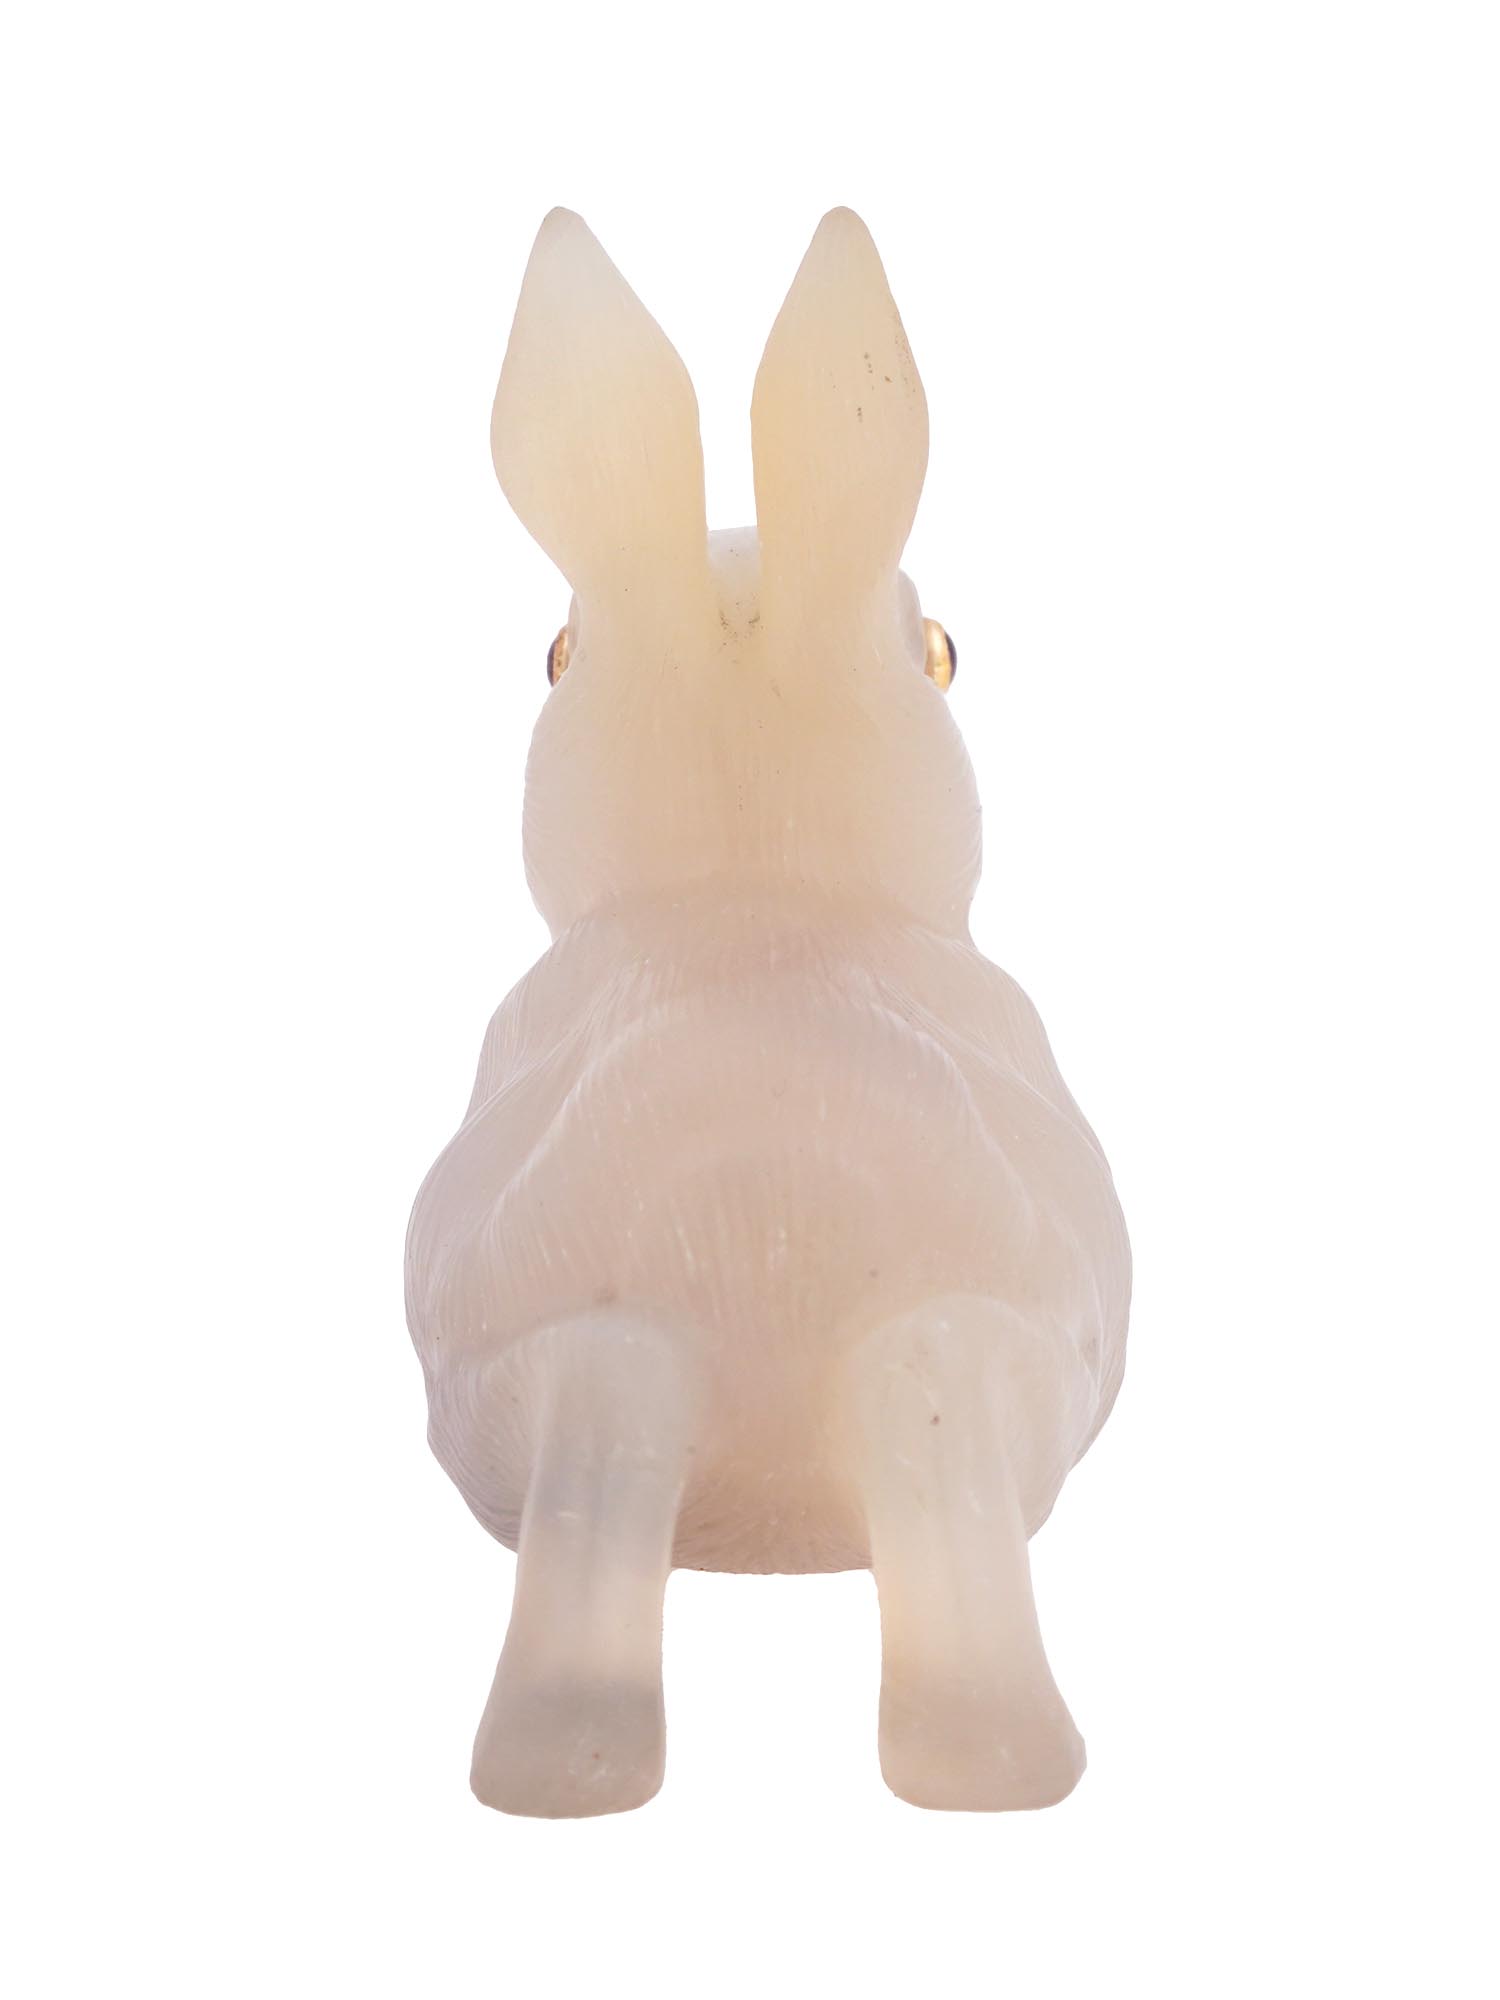 RUSSIAN CHALCEDONY CARVED FIGURE OF A RABBIT PIC-4